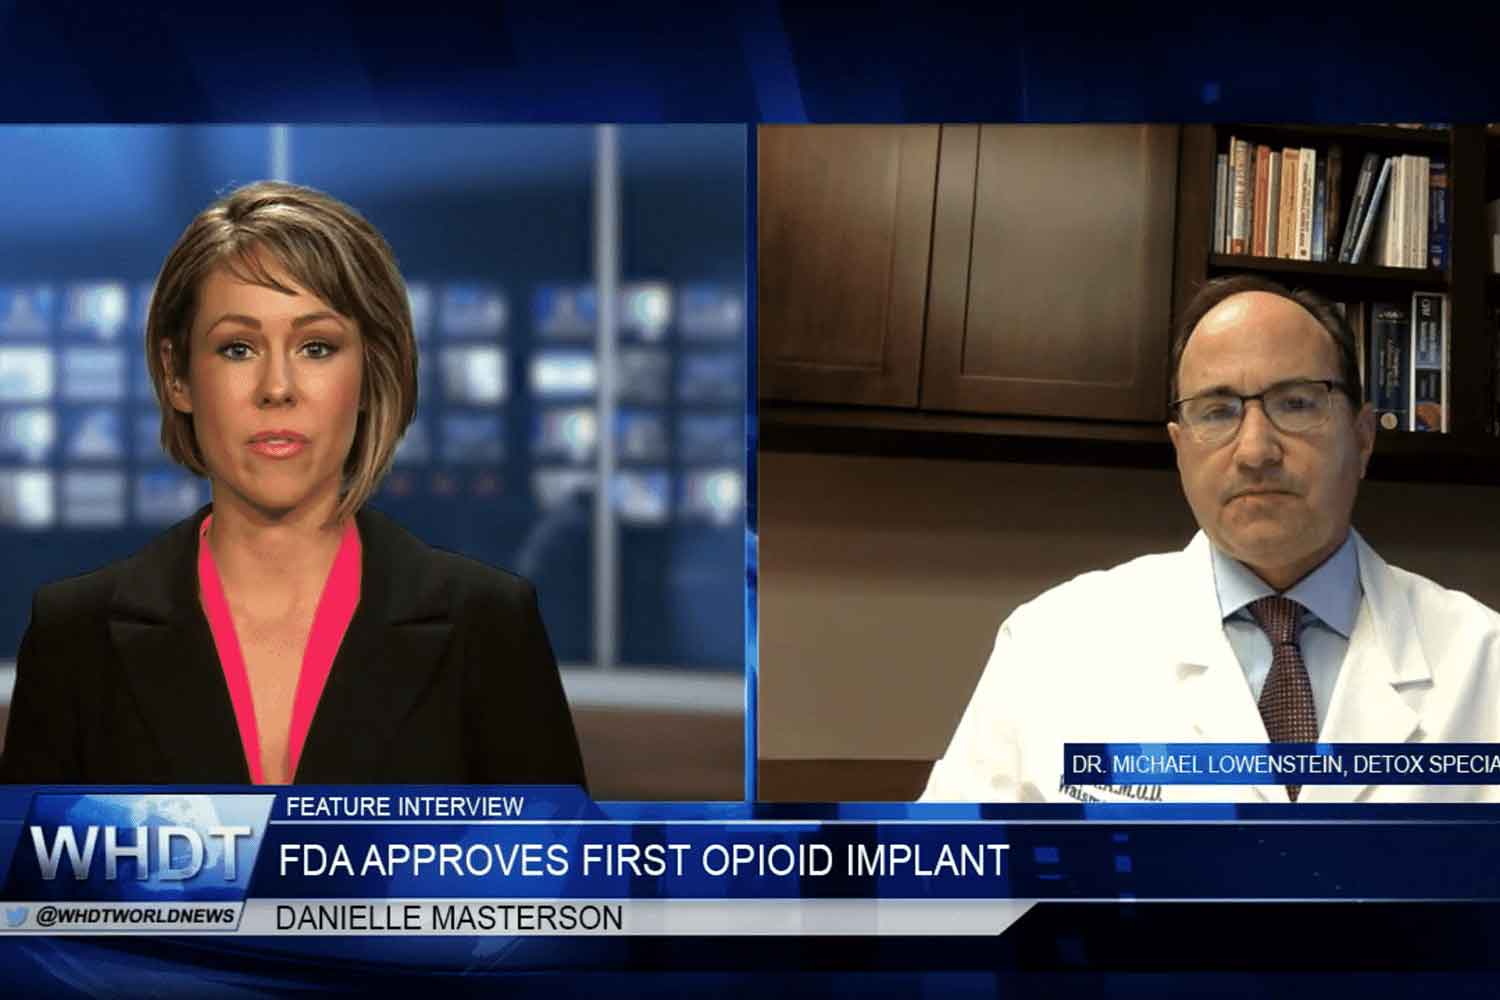 WHDT Interview with Dr Lowenstein on FDA Approval of First Opioid Implant